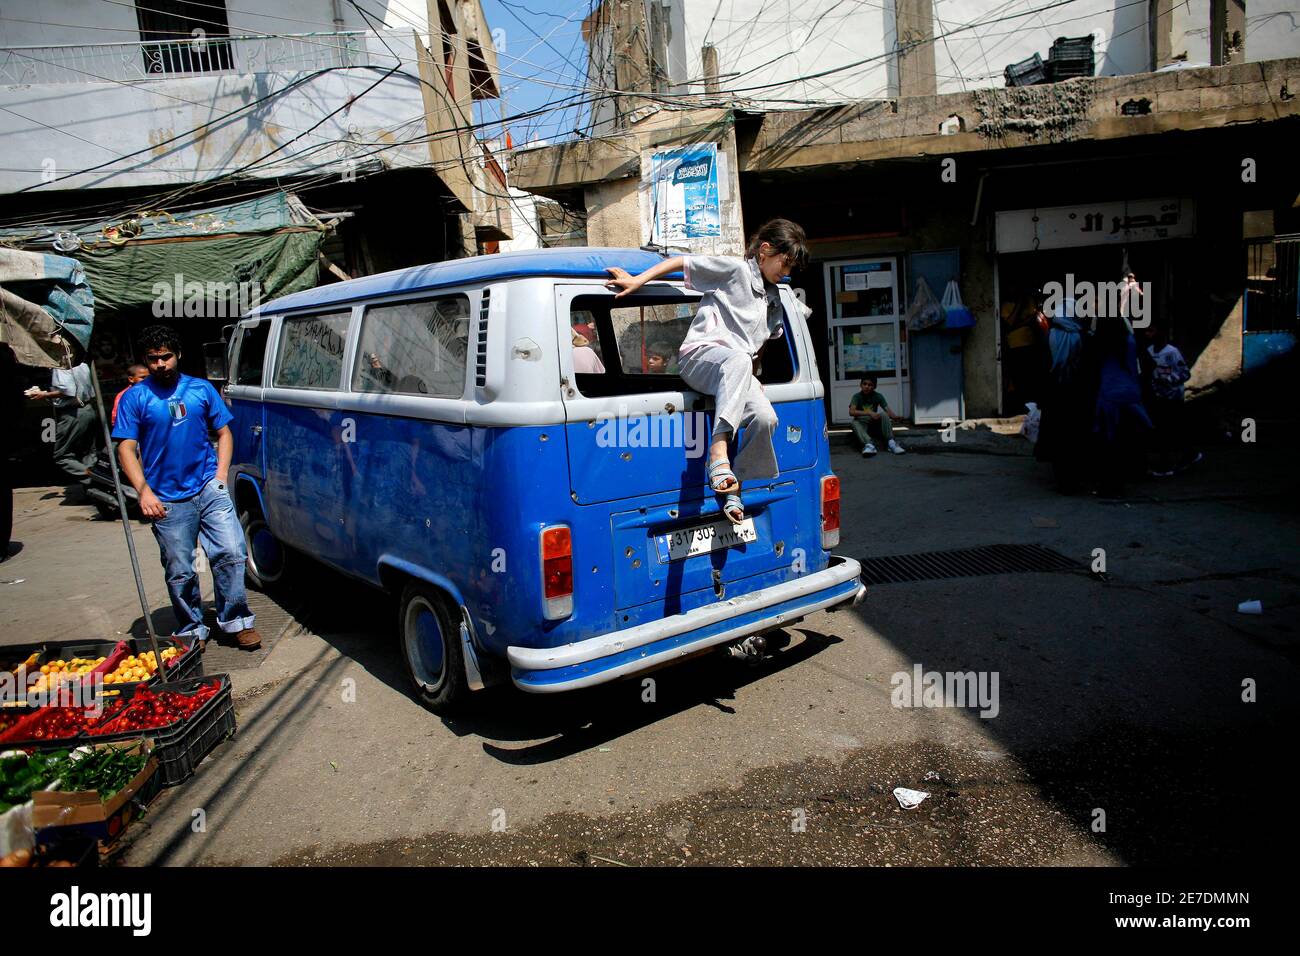 A Palestinian girl jumps out of a van in the Palestinian Beddawi refugee  camp in northern Lebanon May 28, 2007. Palestinian leaders on Monday sought  to end a bloody standoff between the